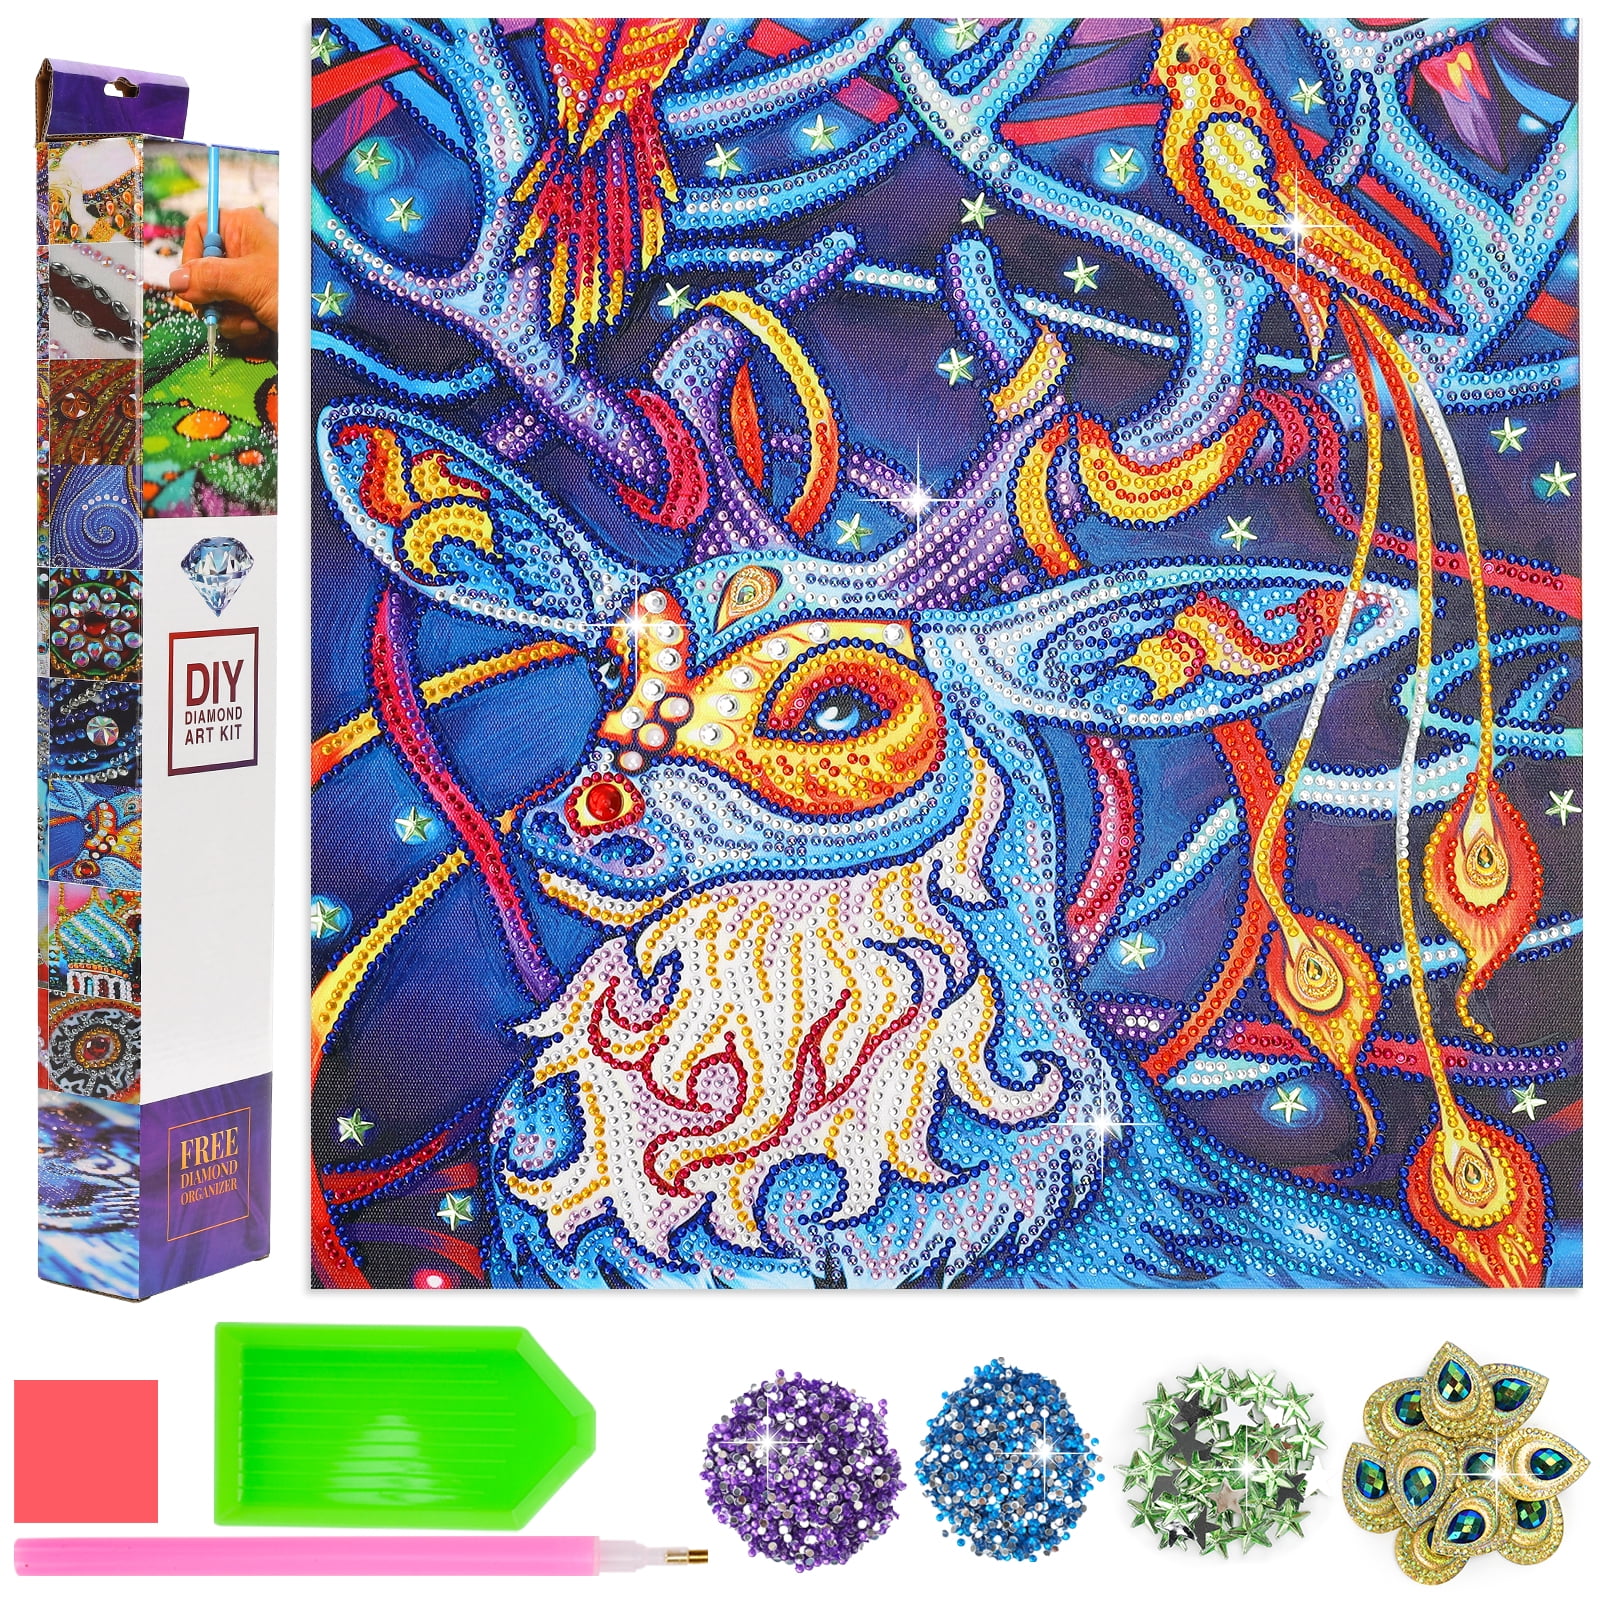 Dream Fun Arts and Crafts for Kids Age 12 11 10 9, Dog Painting Gifts for  Teenage Girls Boys 6-12 Years Old 5D Diamond Art Kits Diamond Embroidery  Kit